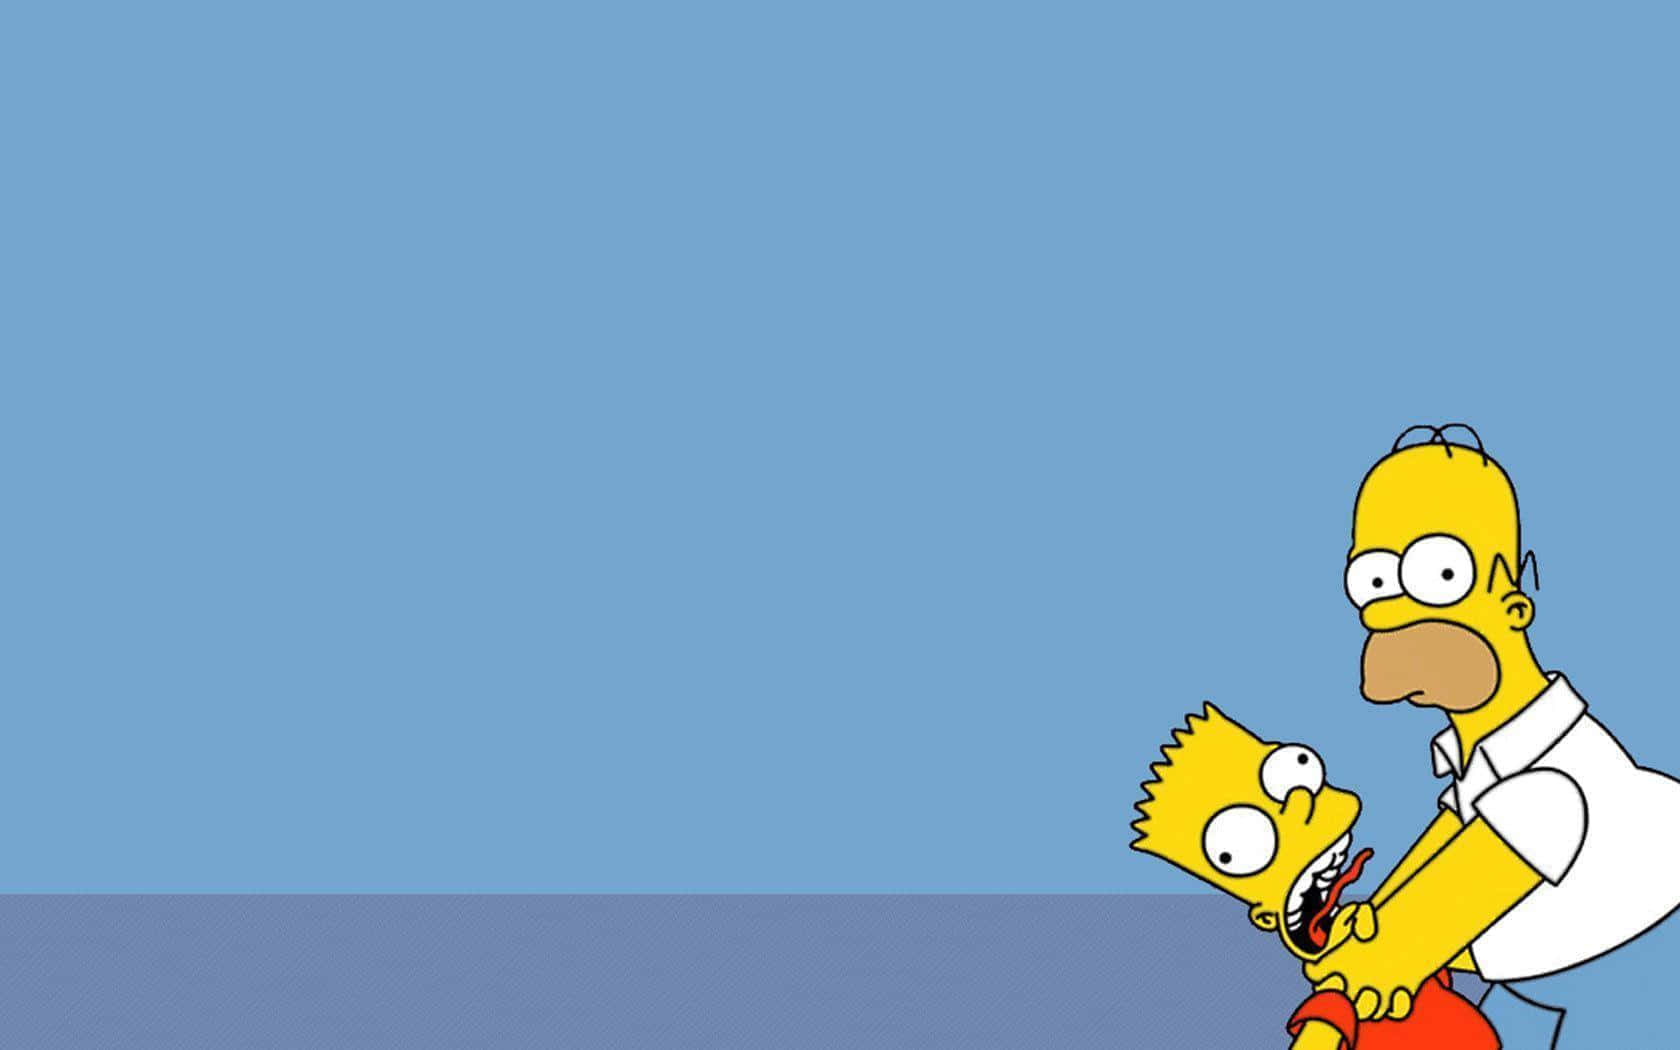 The Simpsons Bring Laughter and Joy to an Everlasting Generation